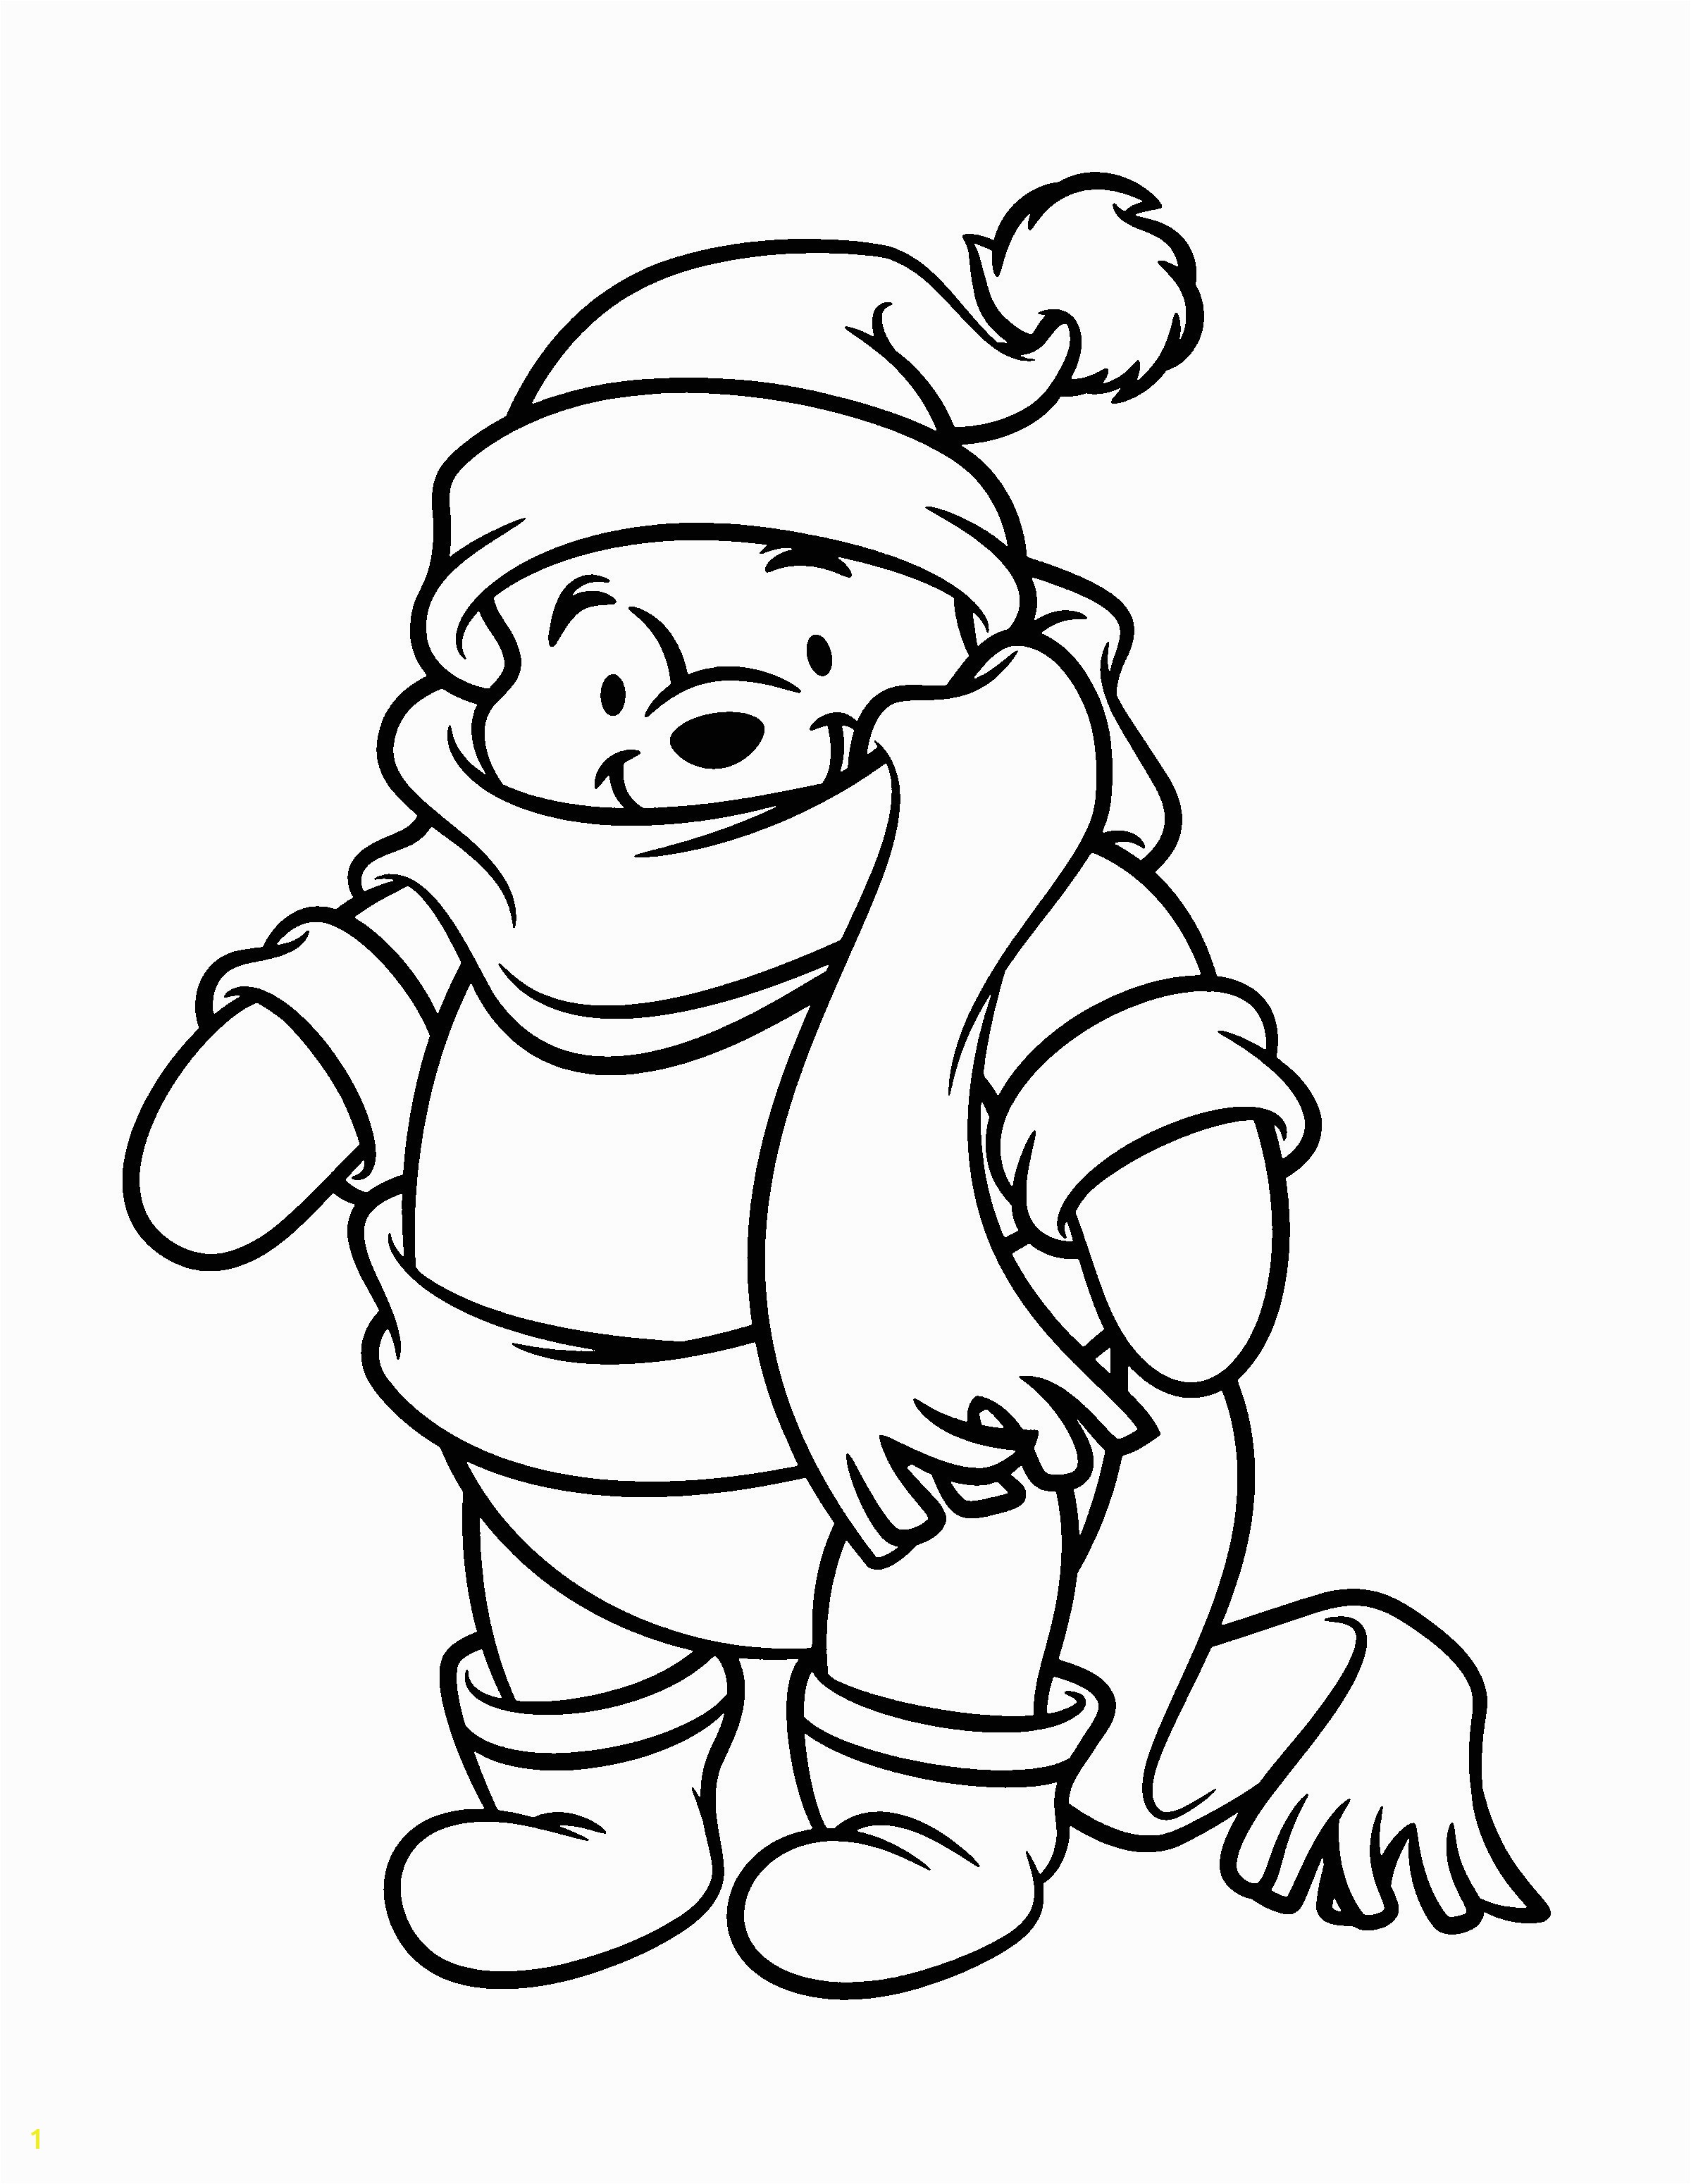 Winnie the Pooh Fall Coloring Pages Pooh Coloring Pages Inspirational Winnie the Pooh Coloring Pages